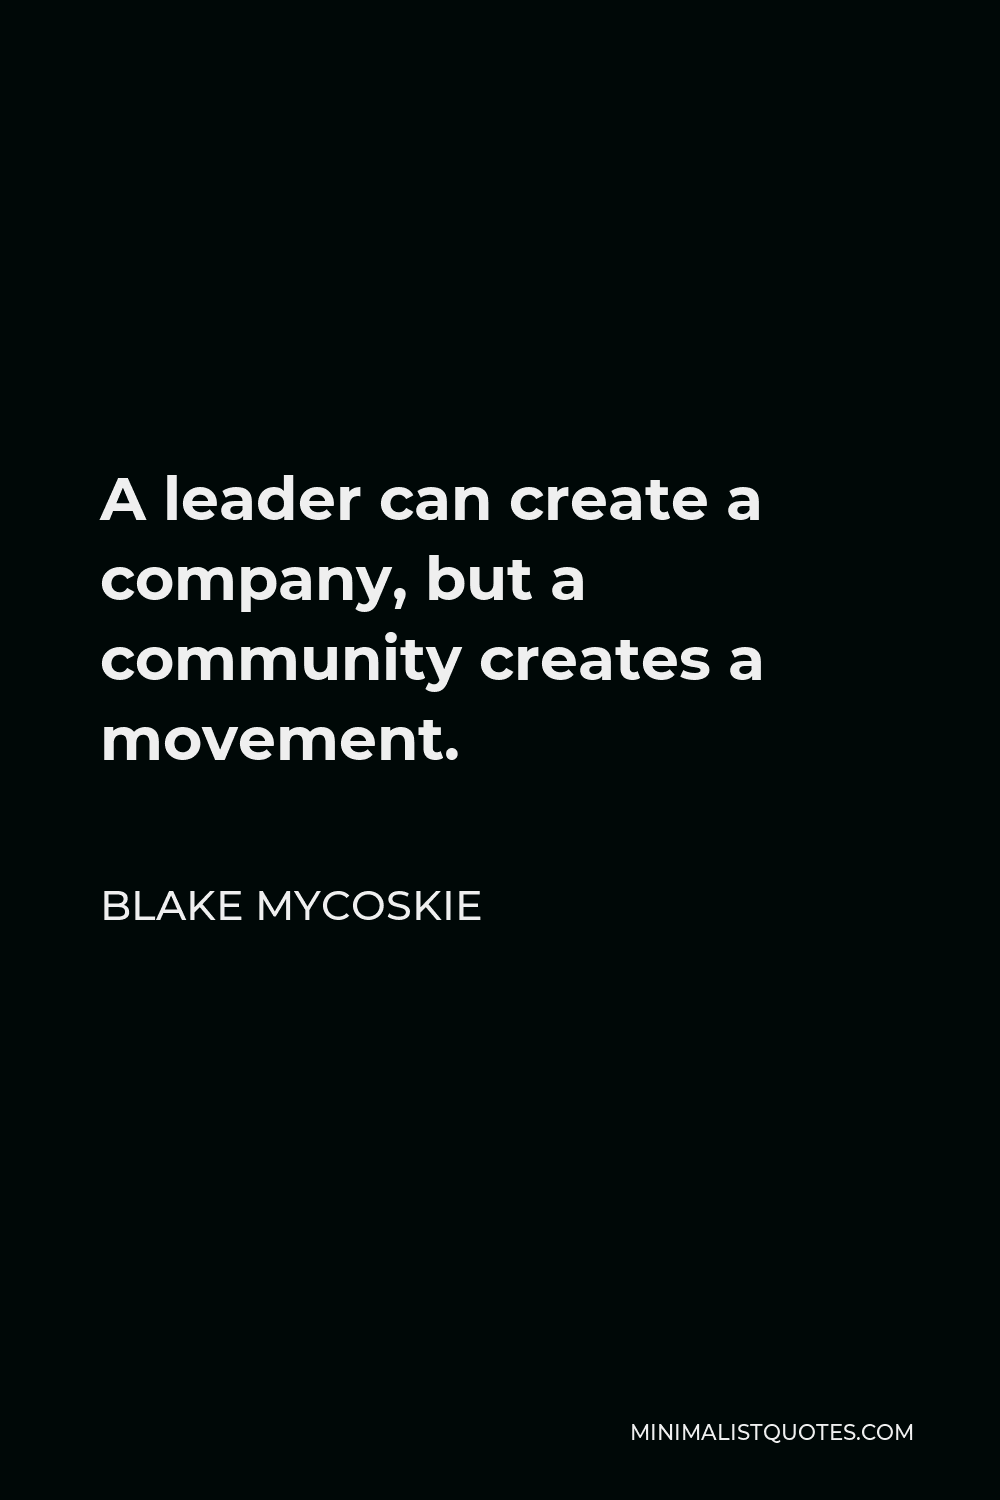 Blake Mycoskie Quote - A leader can create a company, but a community creates a movement.